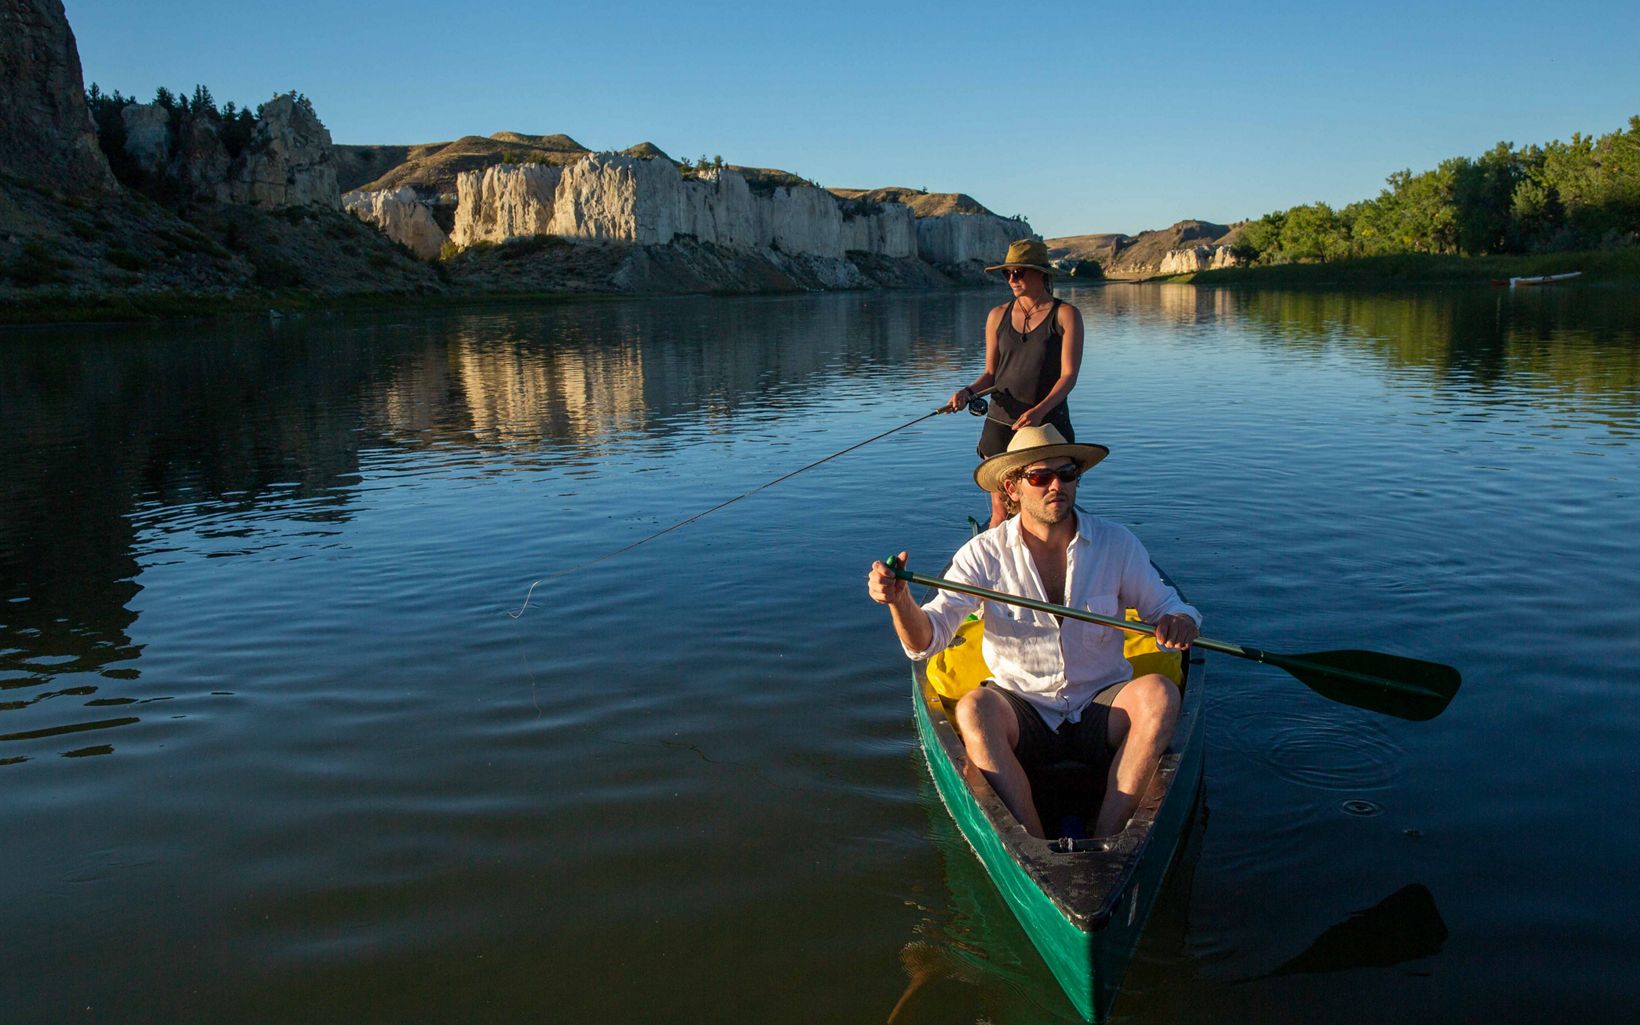 
                
                  Gone Fishing Paul Kupfer paddles while Blakeley Adkins fishes off the side of their canoe as they enter the White Cliffs section of the Upper Missouri River, a popular fly fishing spot.
                  © Louise Johns
                
              